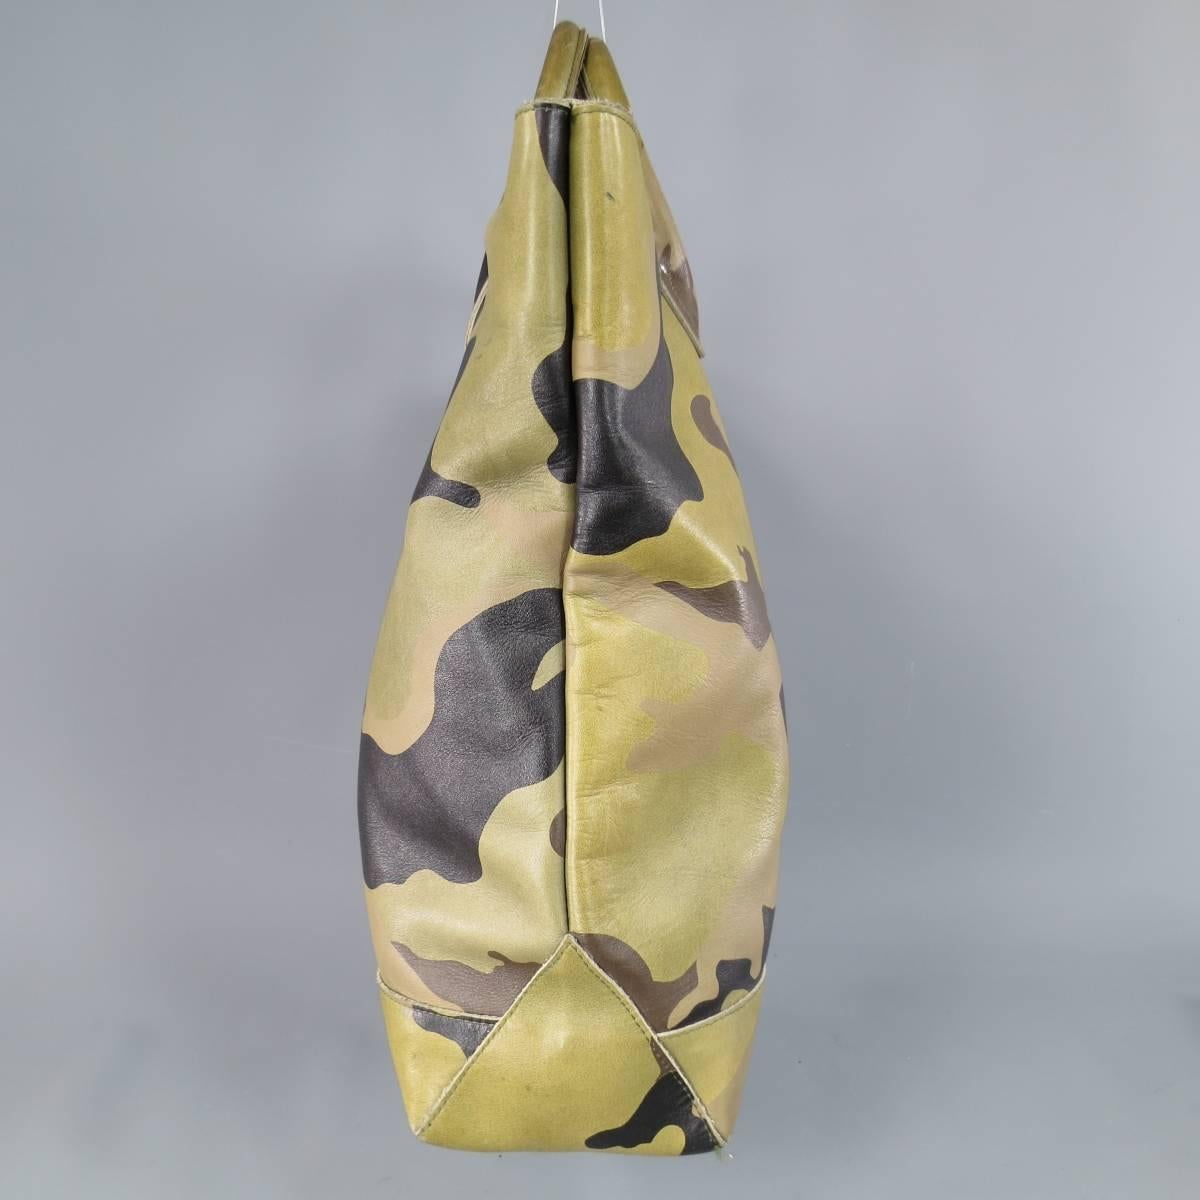 eYe JUNYA WATANABE / COMME des GARCONS for VANSON LEATHER Tote Bag consists of 100% leather material in a olive color tone. Designed with top handles, silver stud detail and tone-on-tone stitching. Camouflage print patterns throughout body with grey